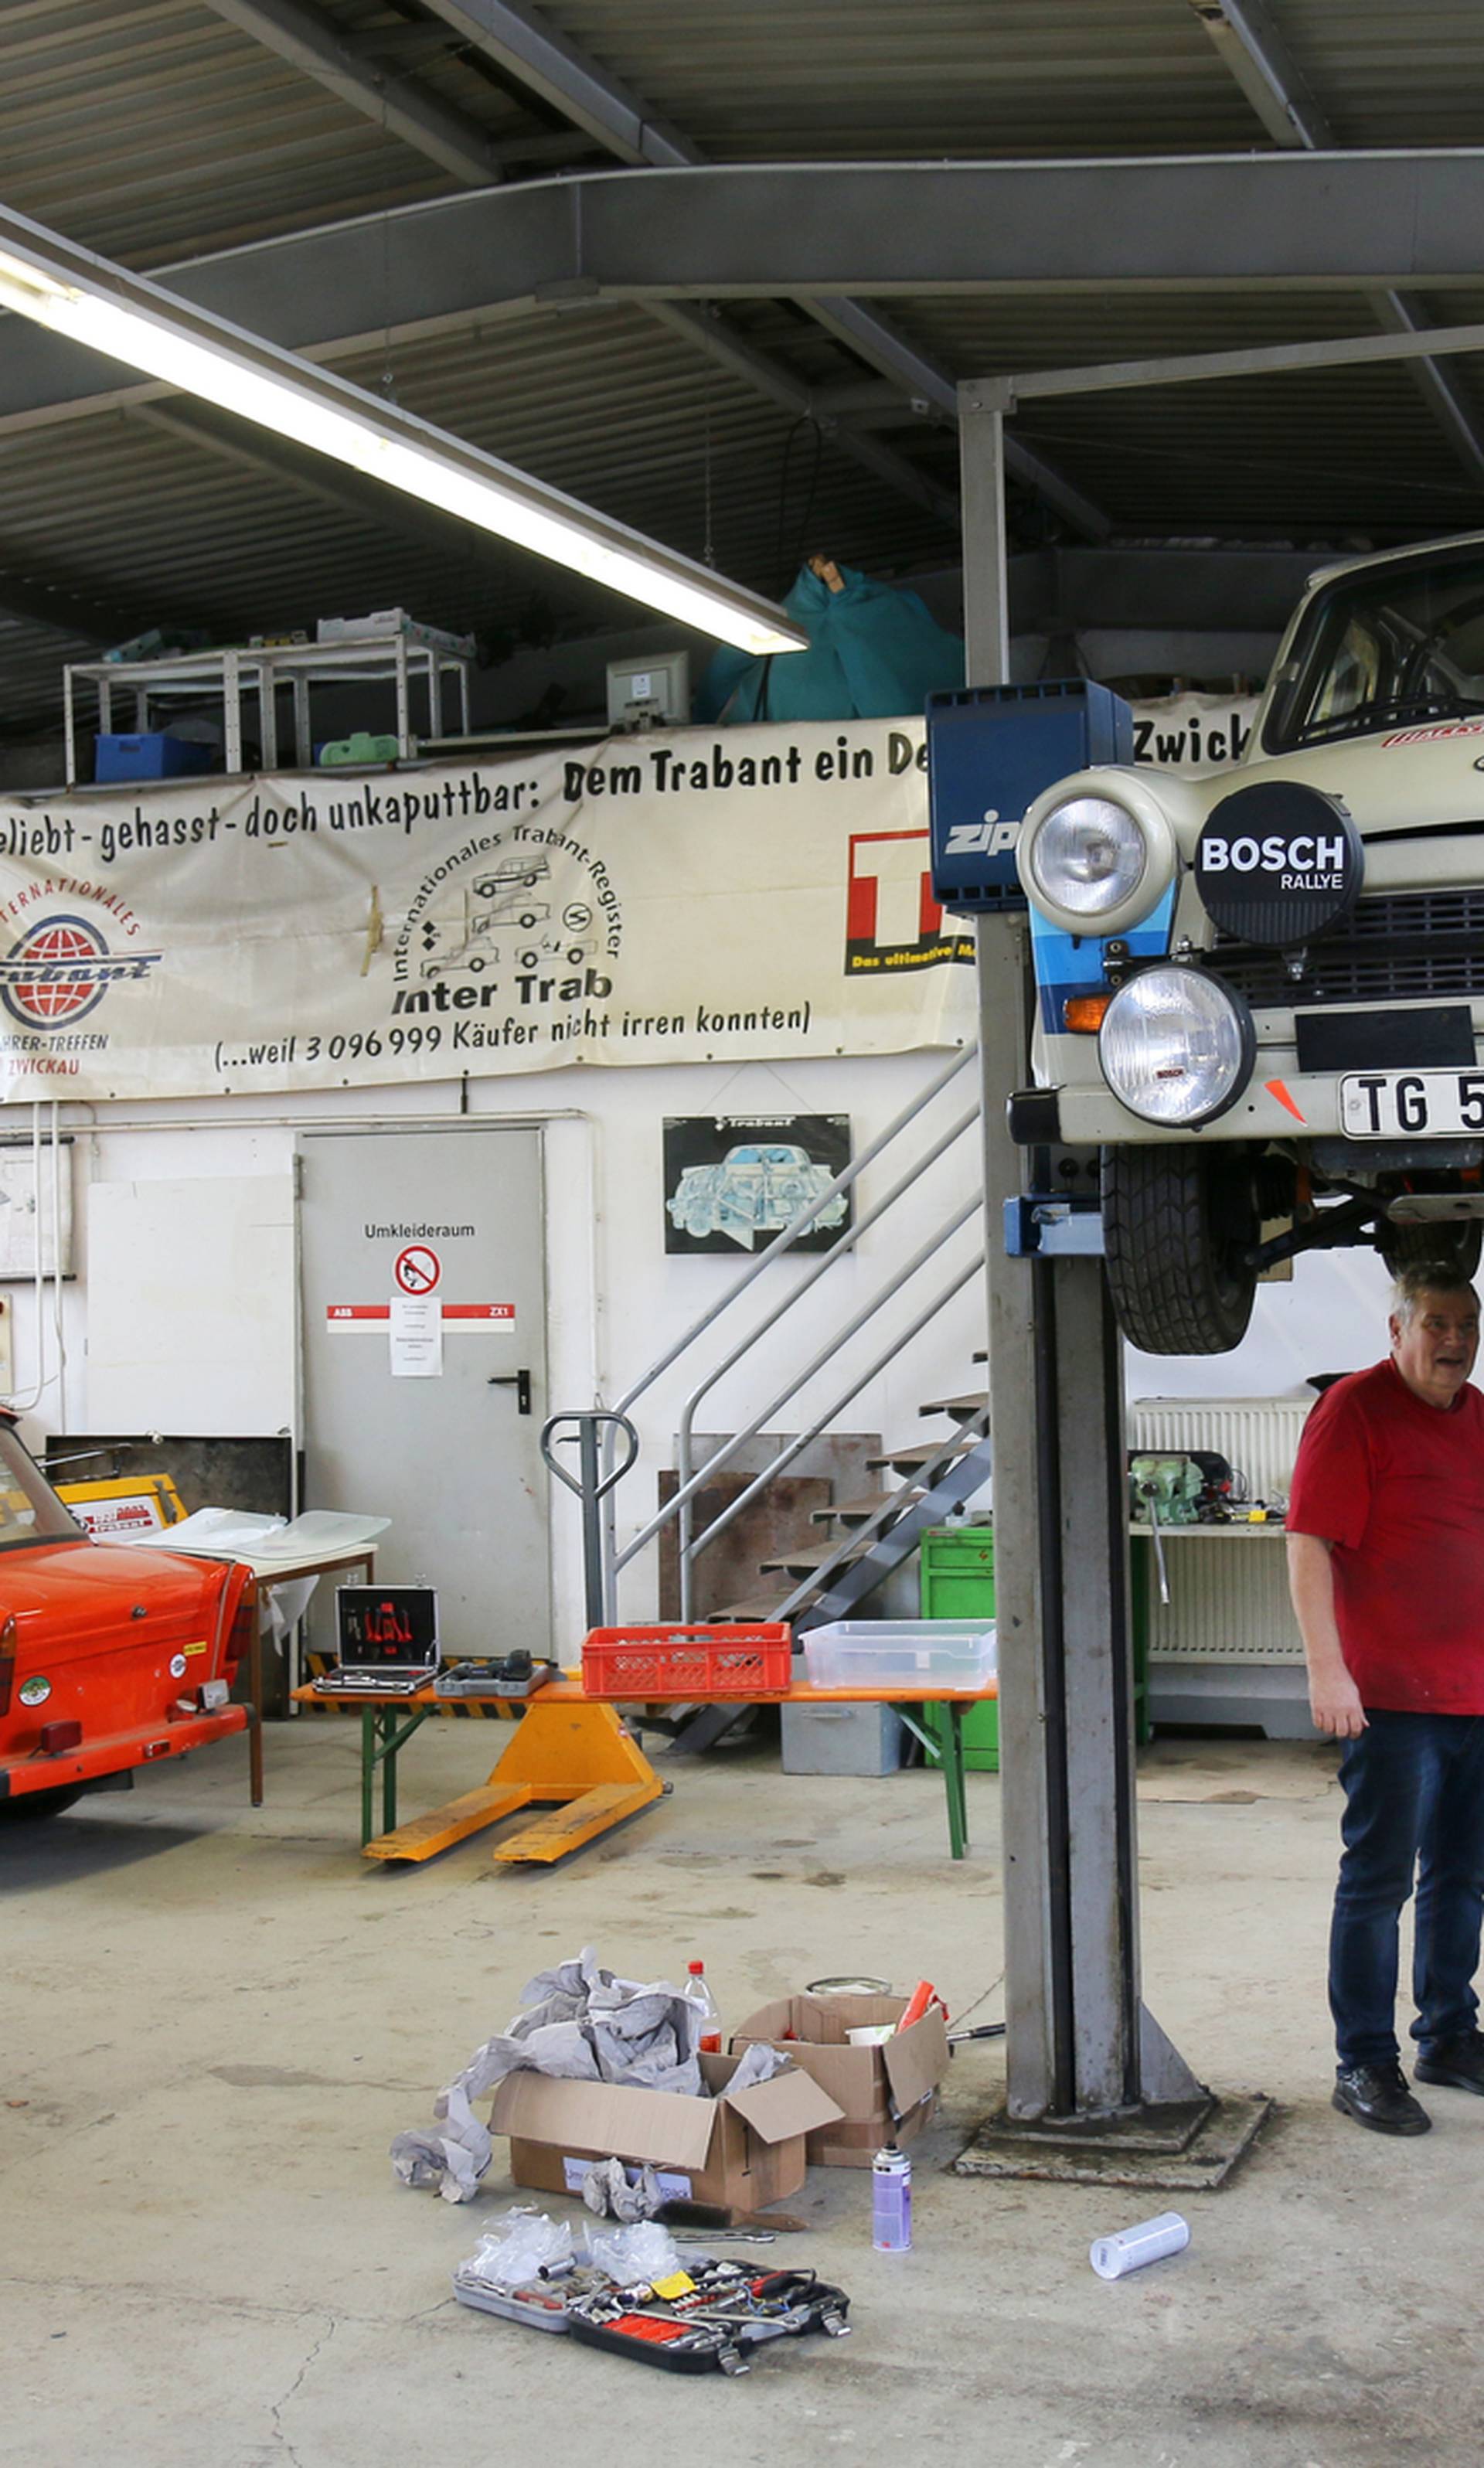 60 years of Trabi - Fascination for the cult car is unbroken